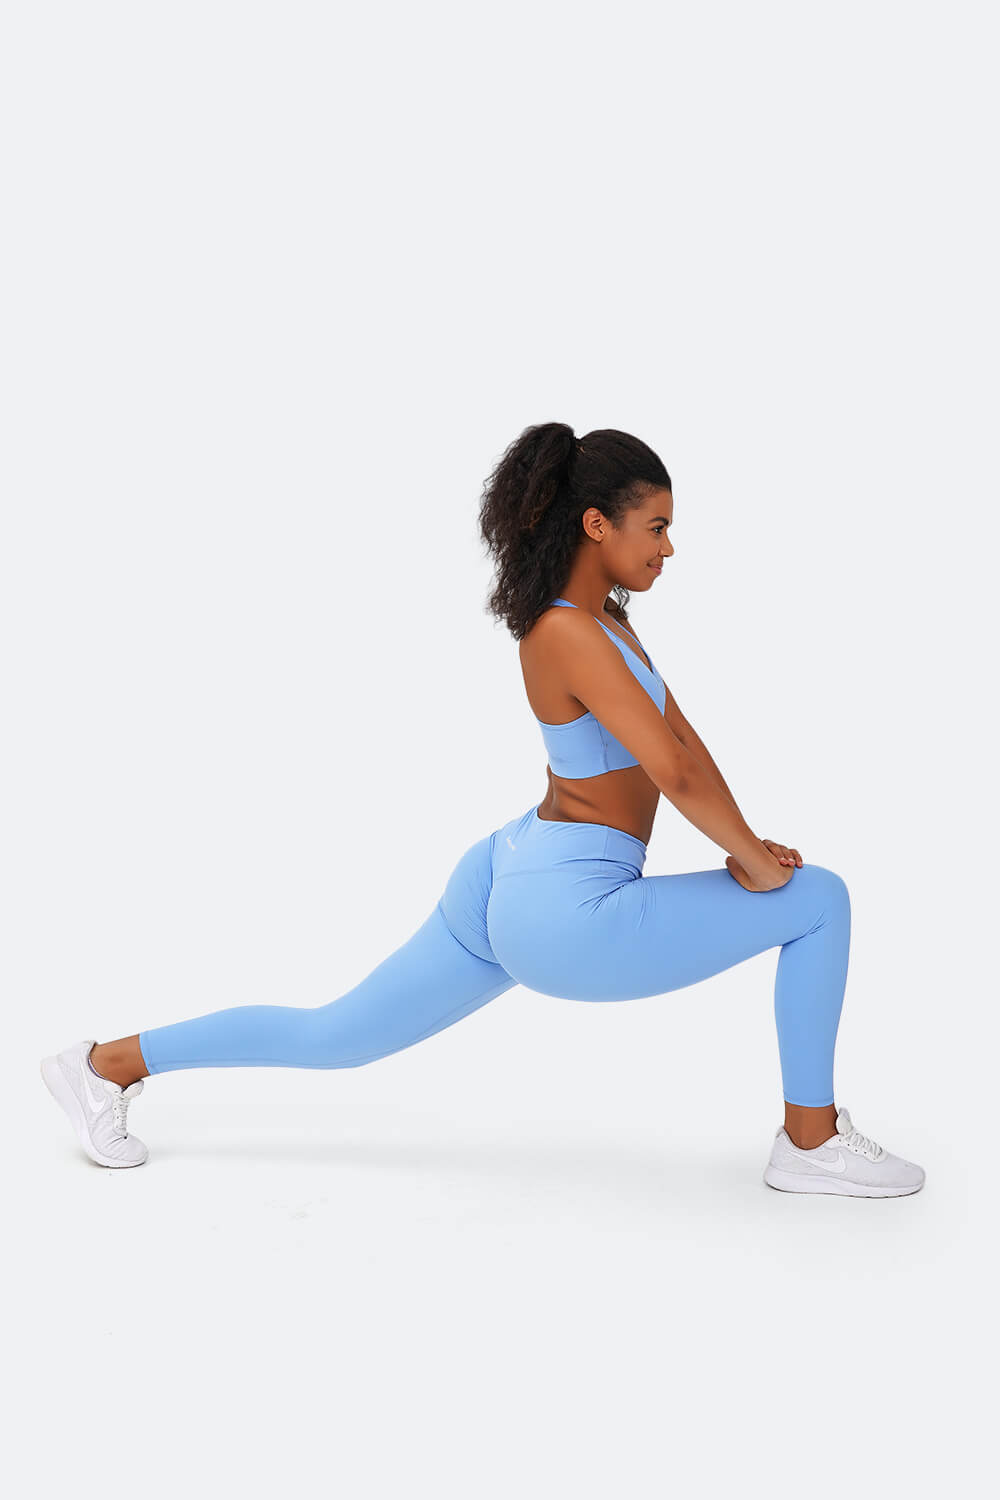 Amazon shoppers love these 'bum lifting' leggings —and they're on sale for  $23